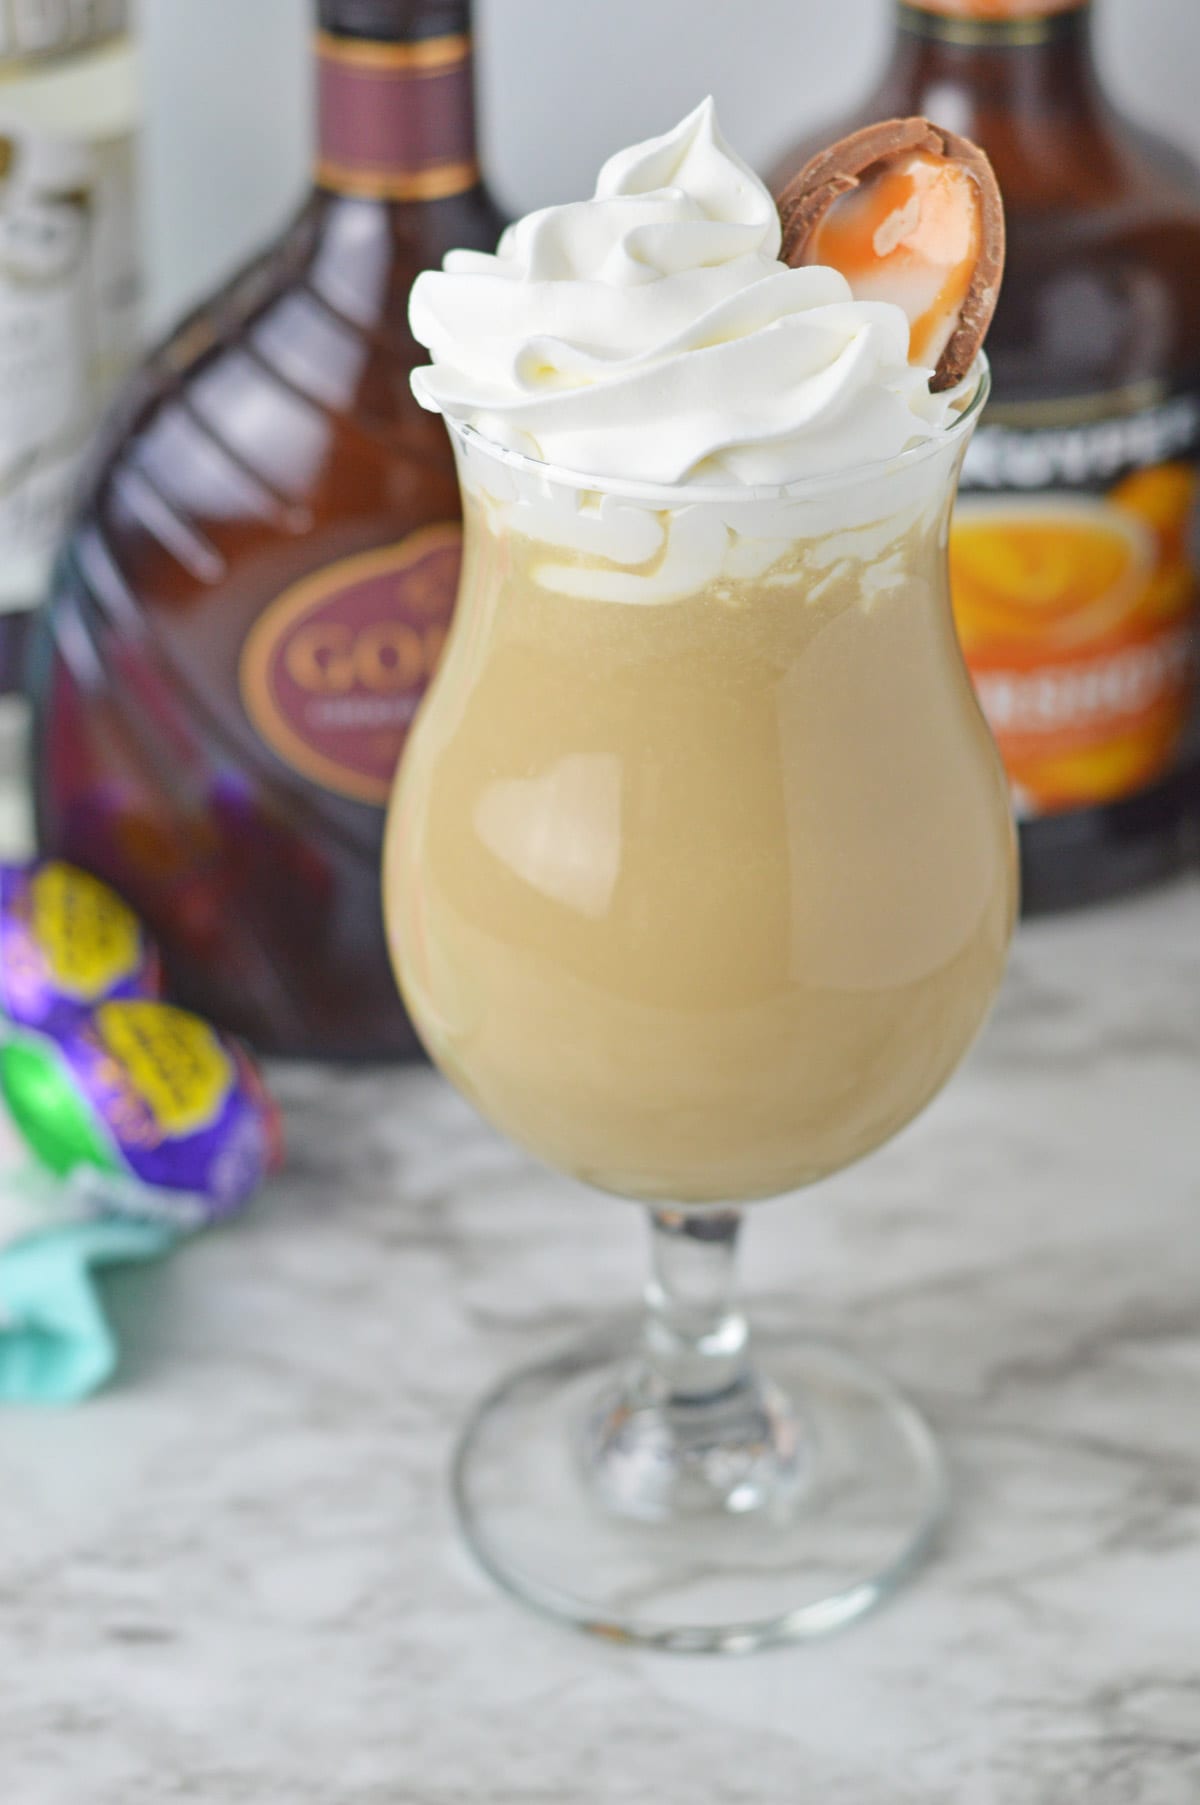 Cadbury creme agg cocktail with whipped cream